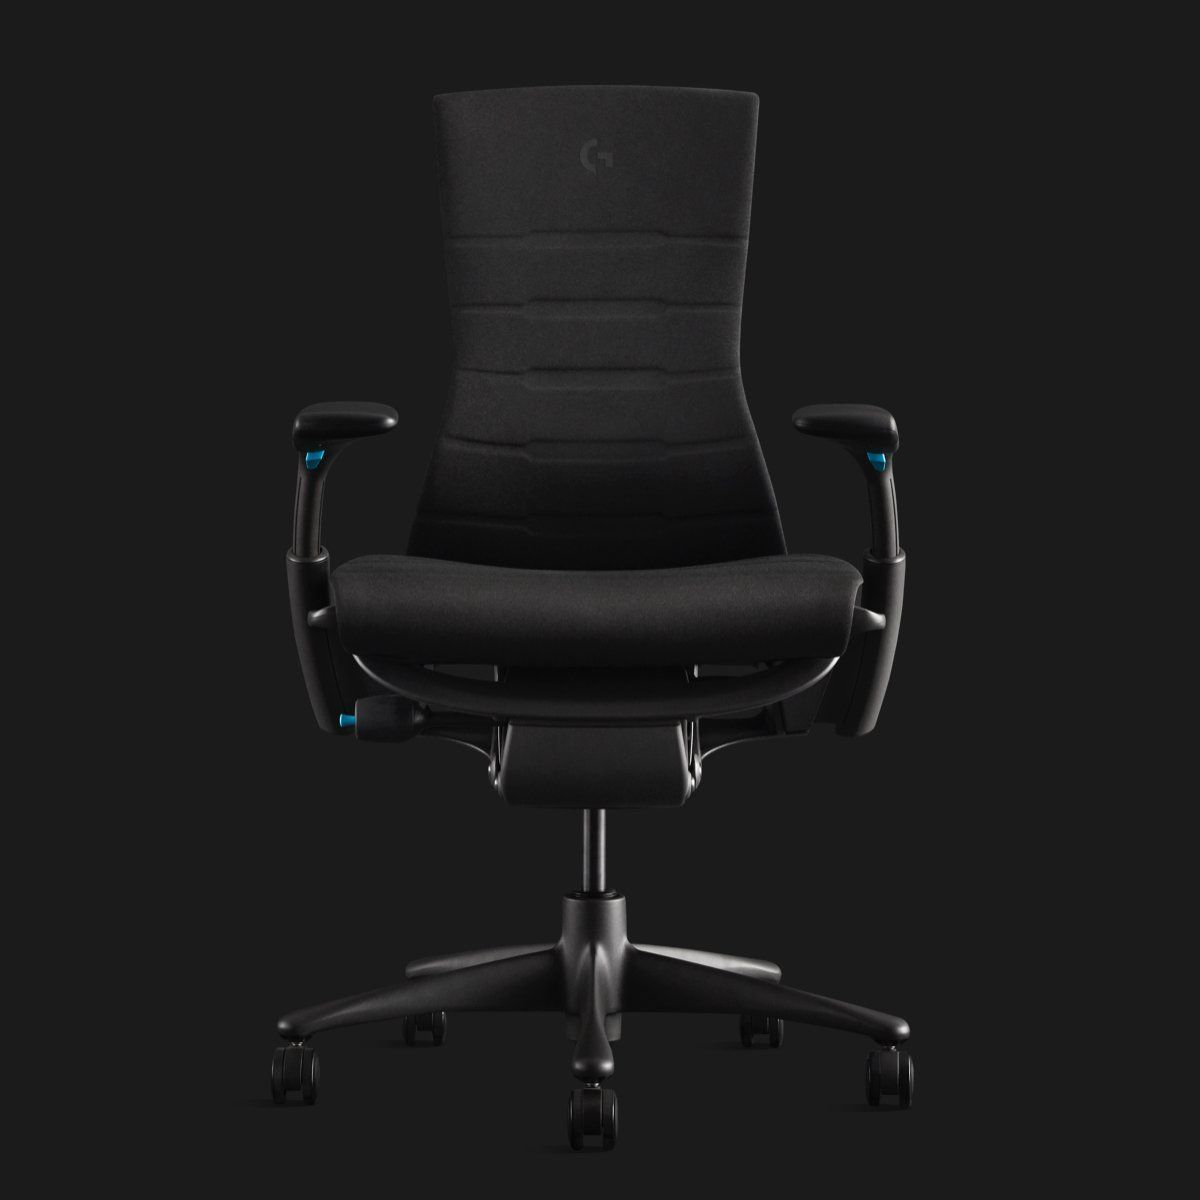 Embody Gaming Chair : vos fesses méritent ce fauteuil gaming à 1500 dollars #5